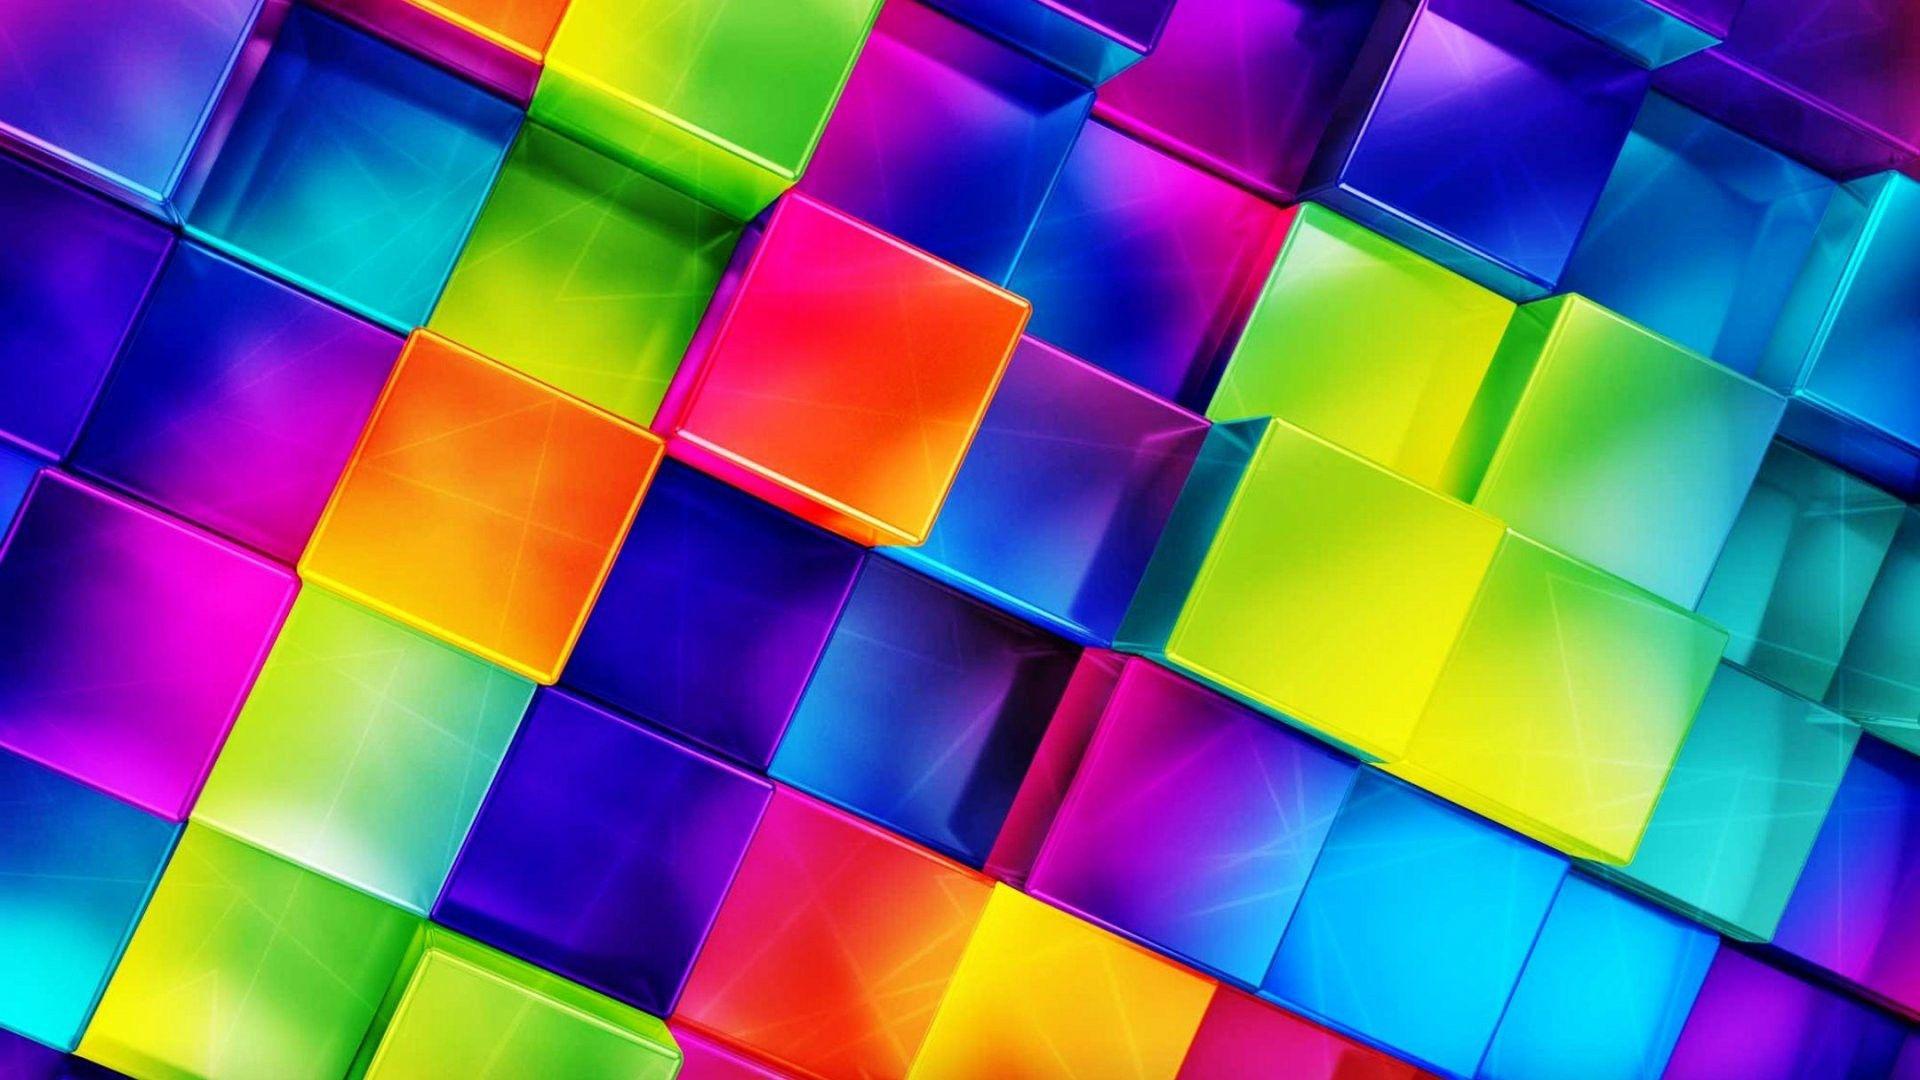 Bright Colorful Abstract Wallpapers - Top Free Bright Colorful Abstract